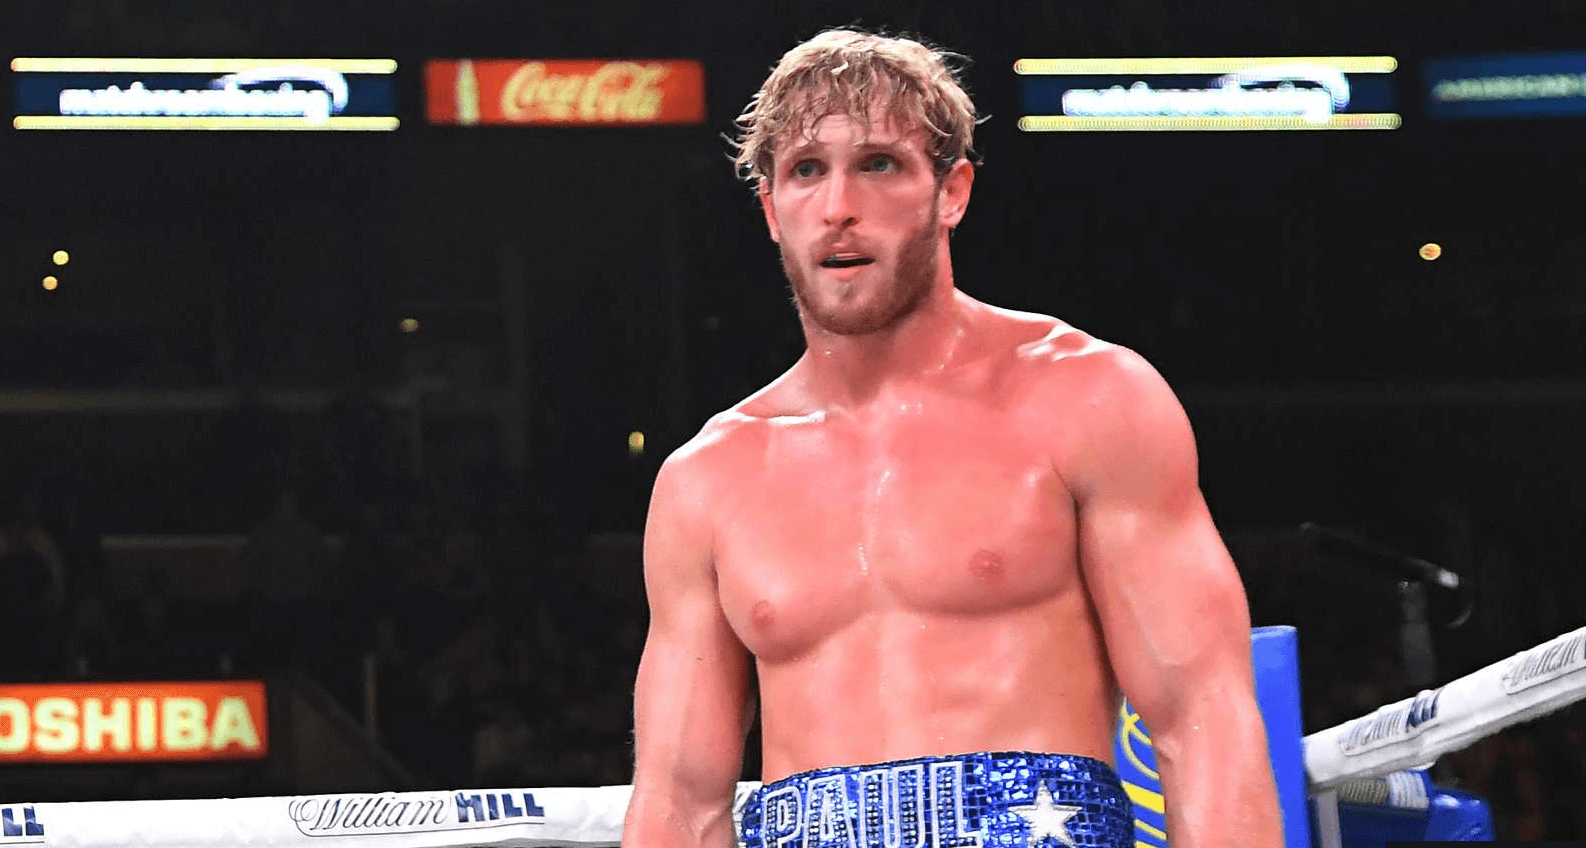 Could we see Logan Paul in the UFC? Dana White doesn’t dismiss the idea